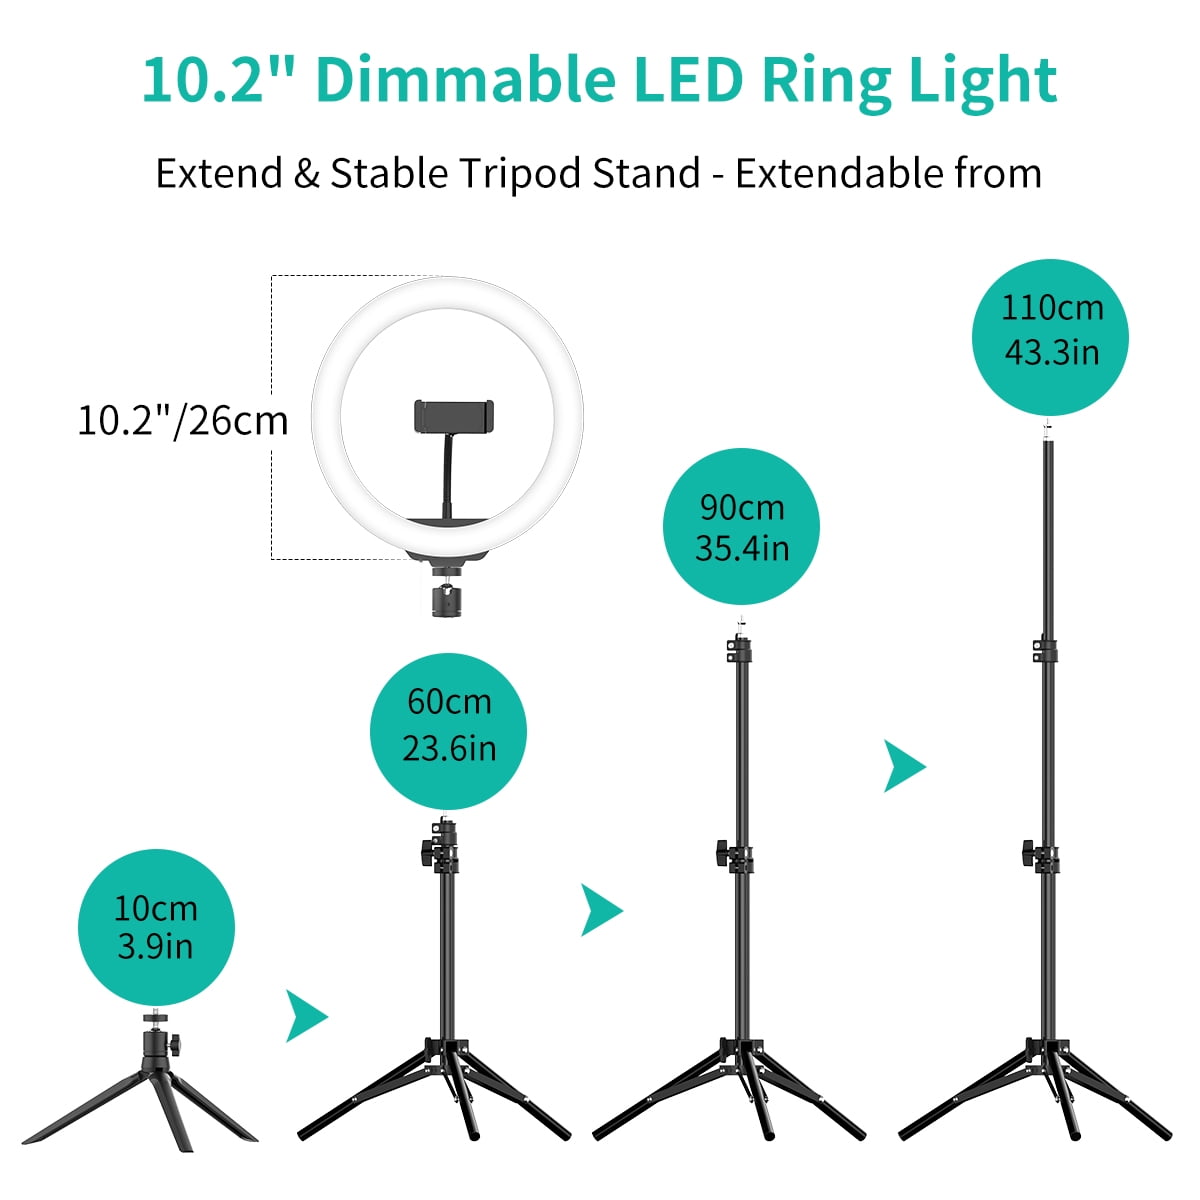 3 Modes 10 Brightness LED Ringlight for Makeup/Photography/Live Streaming/YouTube TikTok ERUW 10.2 Selfie Ring Light with Tripod Stand & Phone Holder